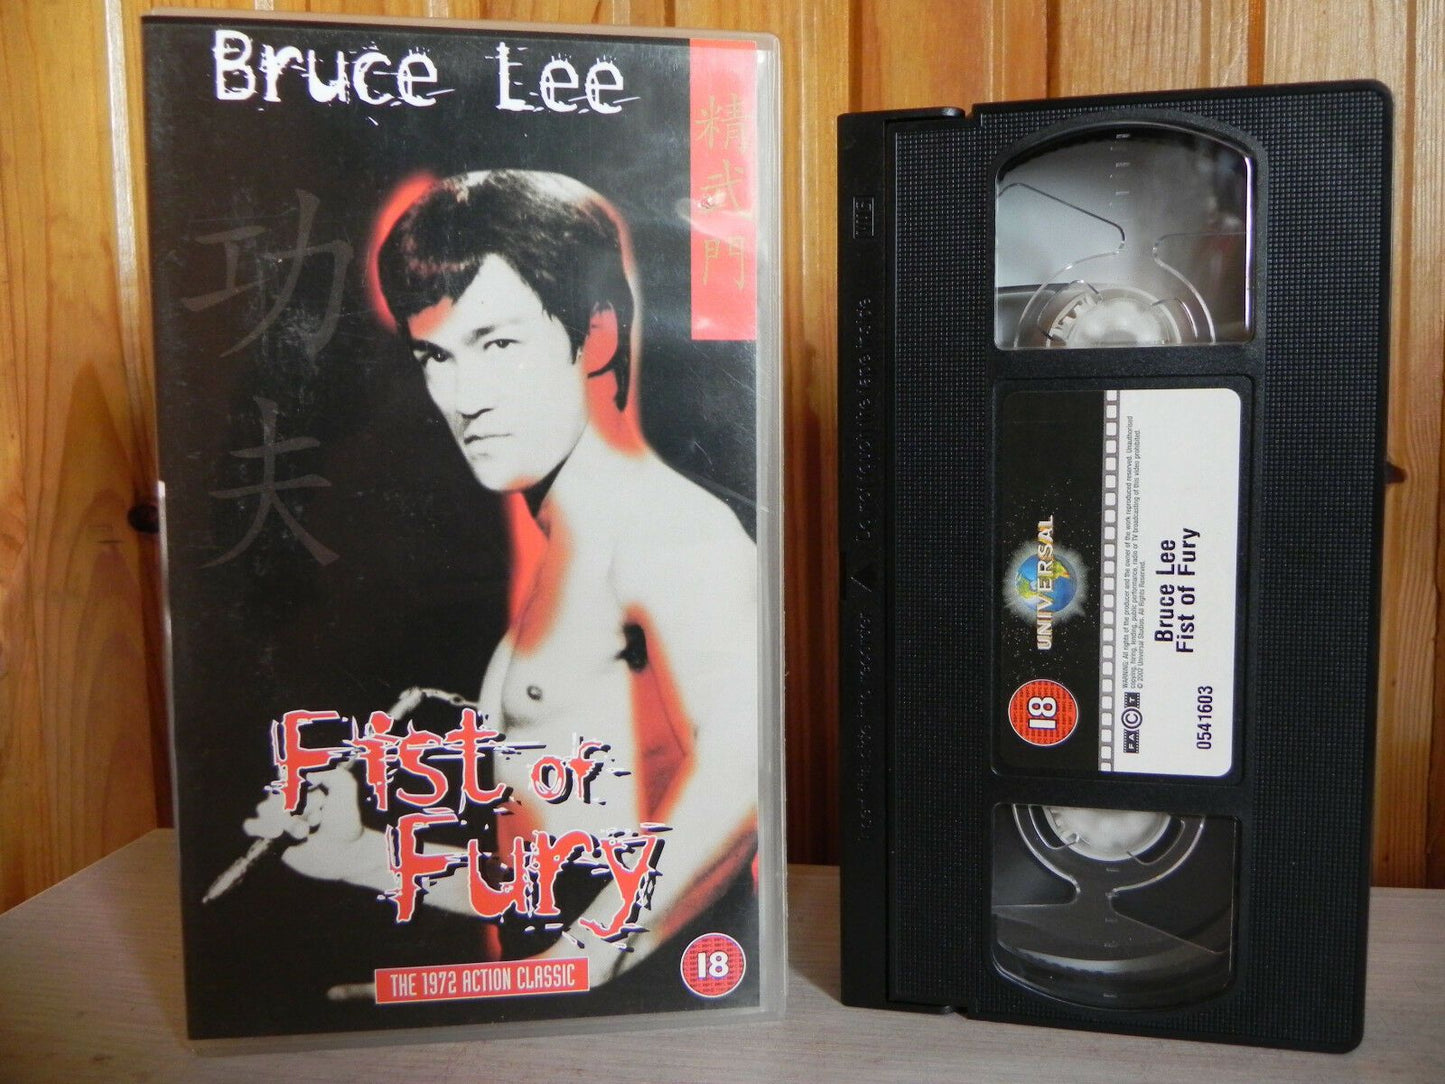 Fist Of Fury - 4 Front - The 1972 Action Classic - Cert (18) - Bruce Lee - VHS-